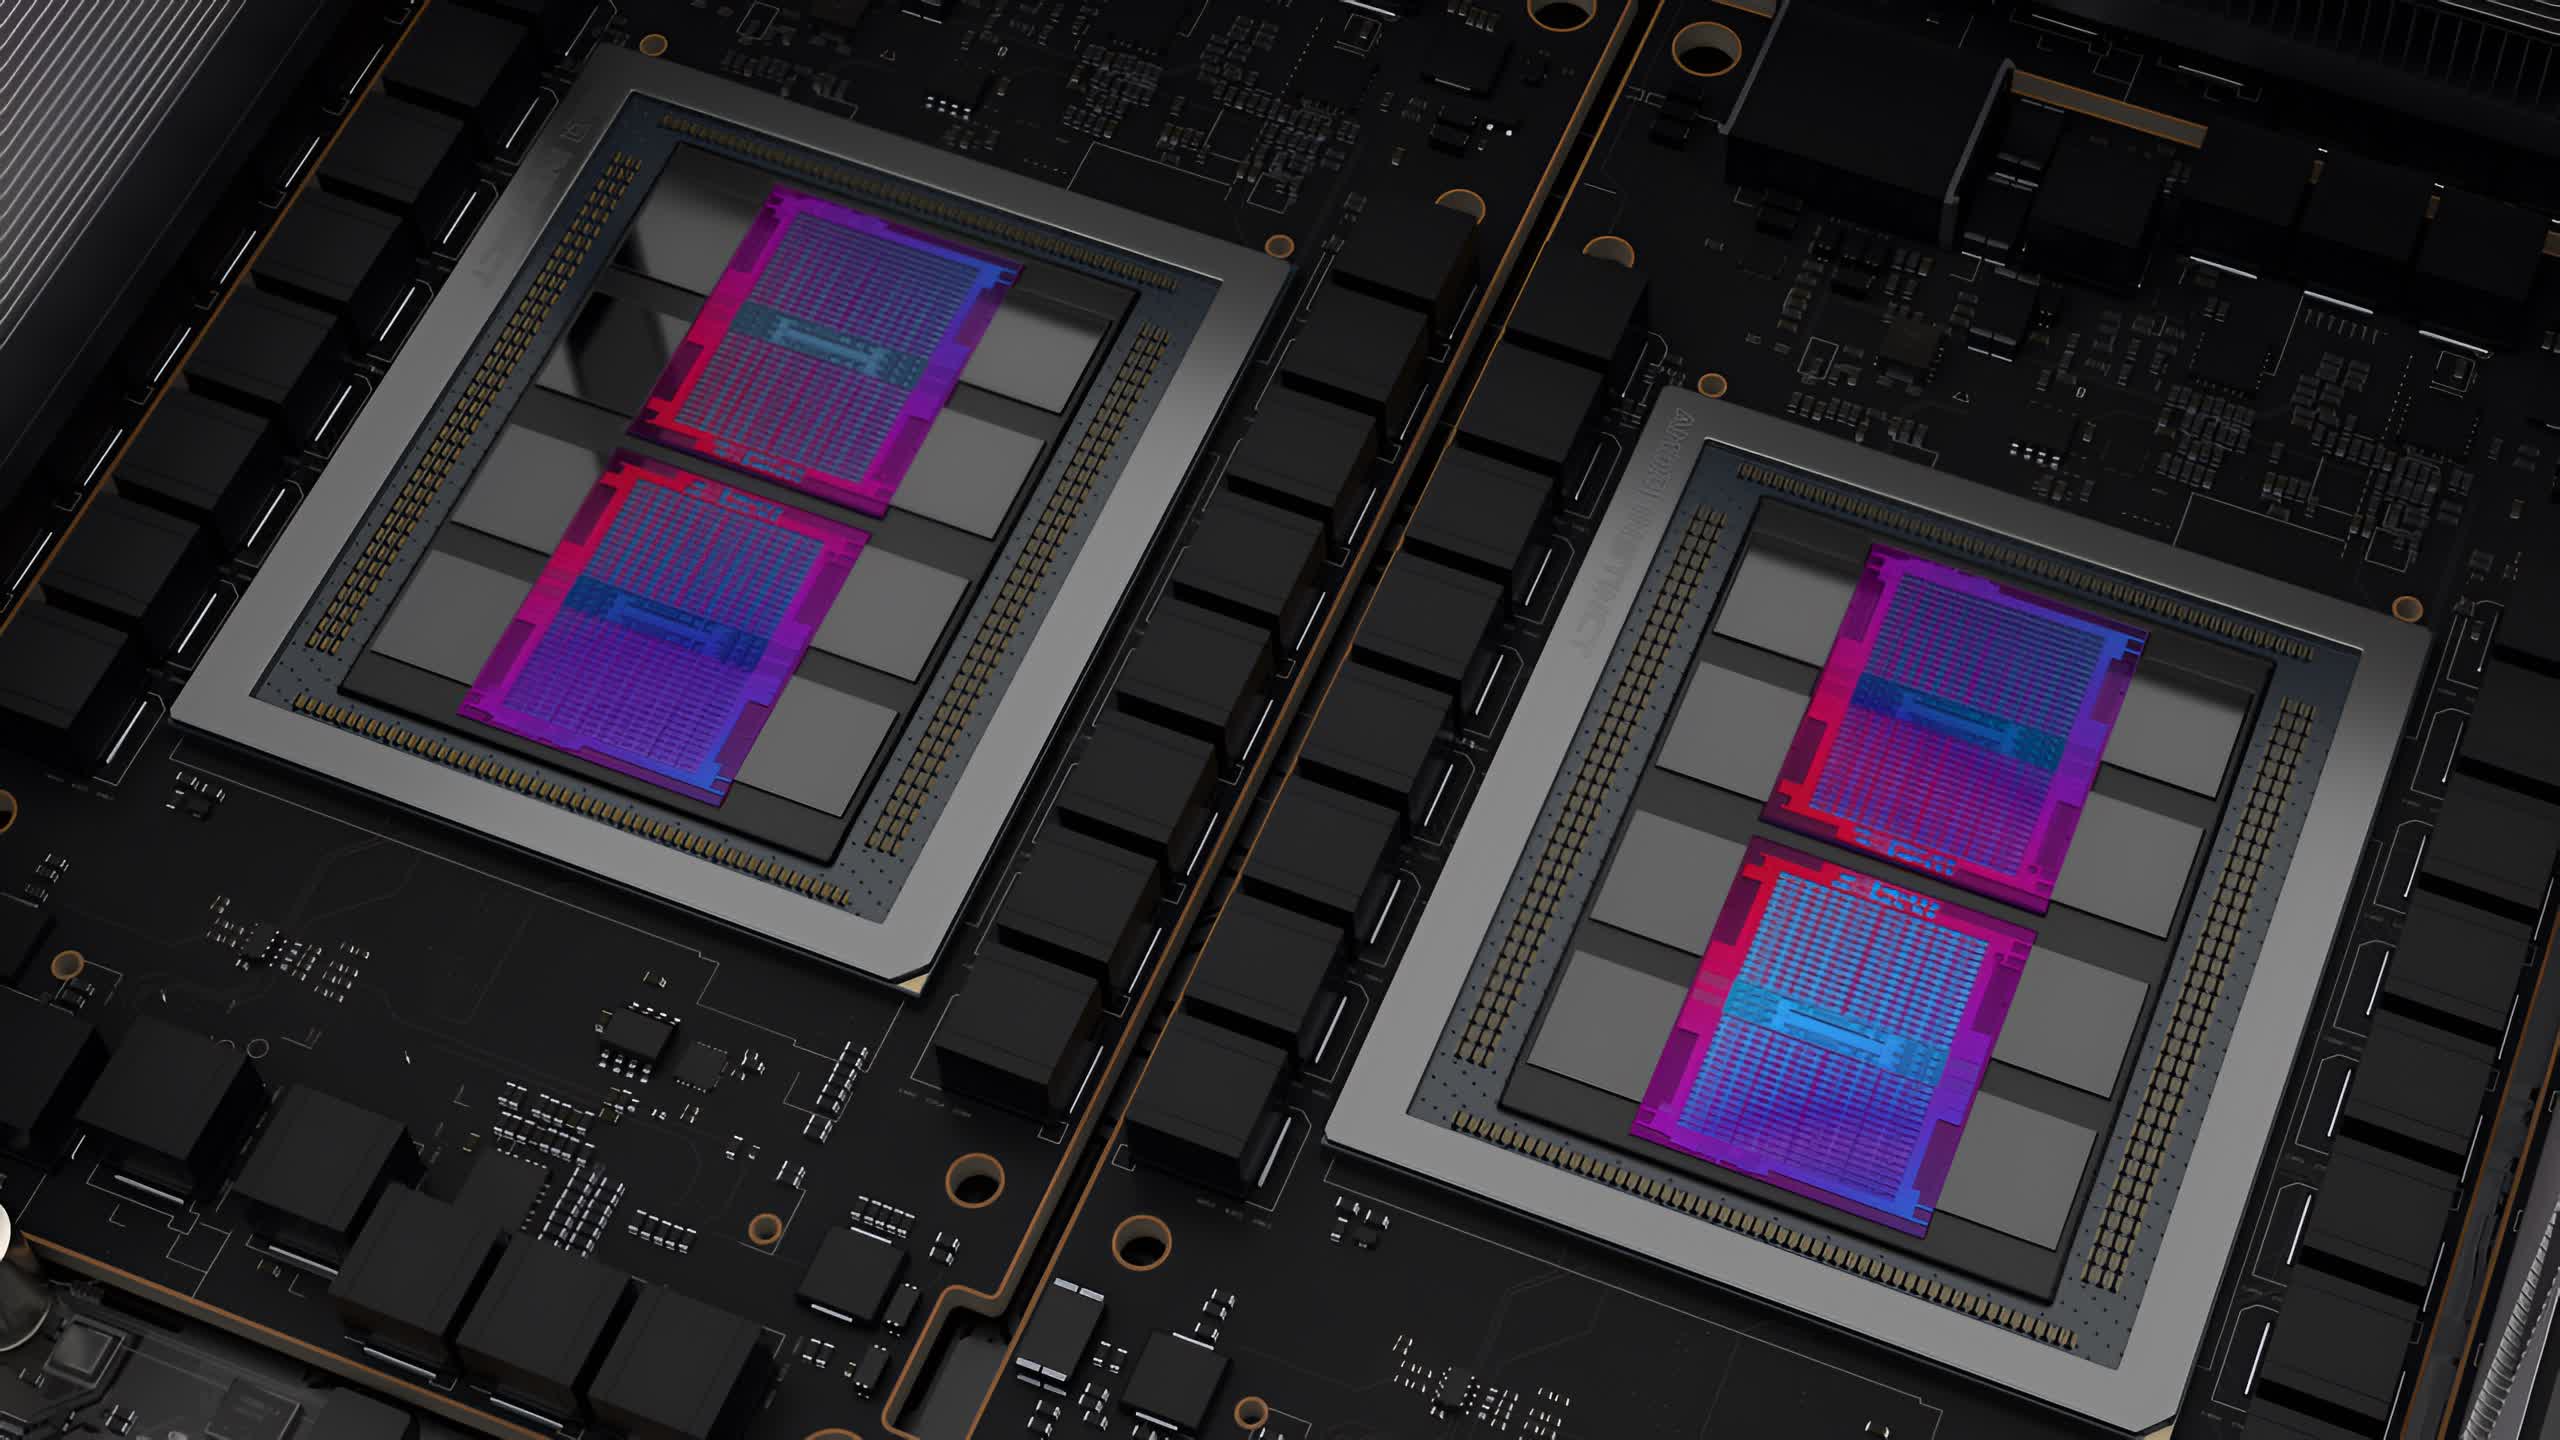 Microsoft and AMD could be partnering on AI chips